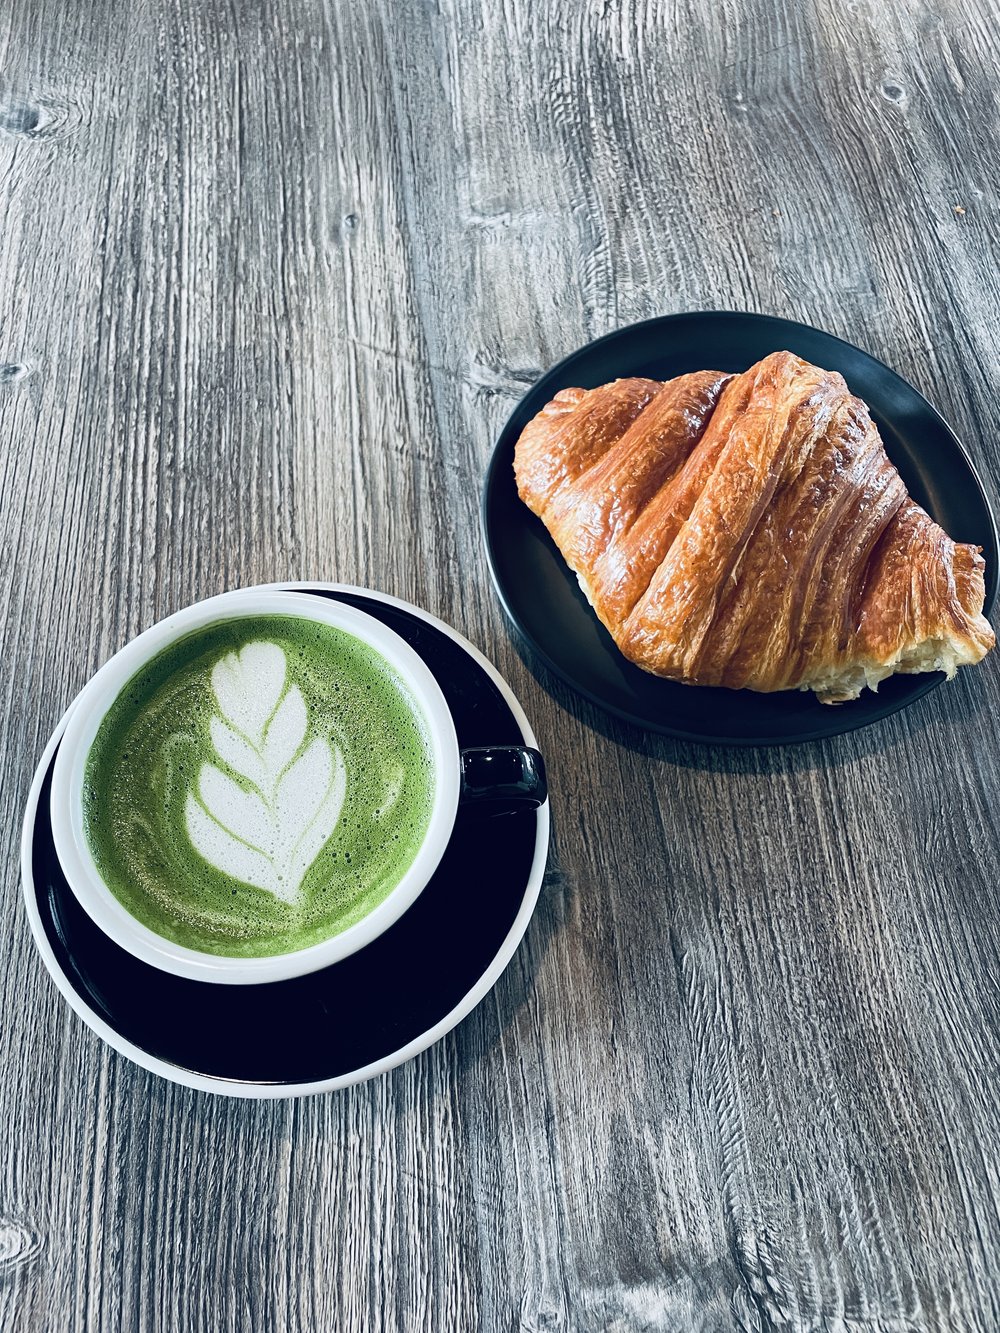 Matcha Lattee and Butter Croissant